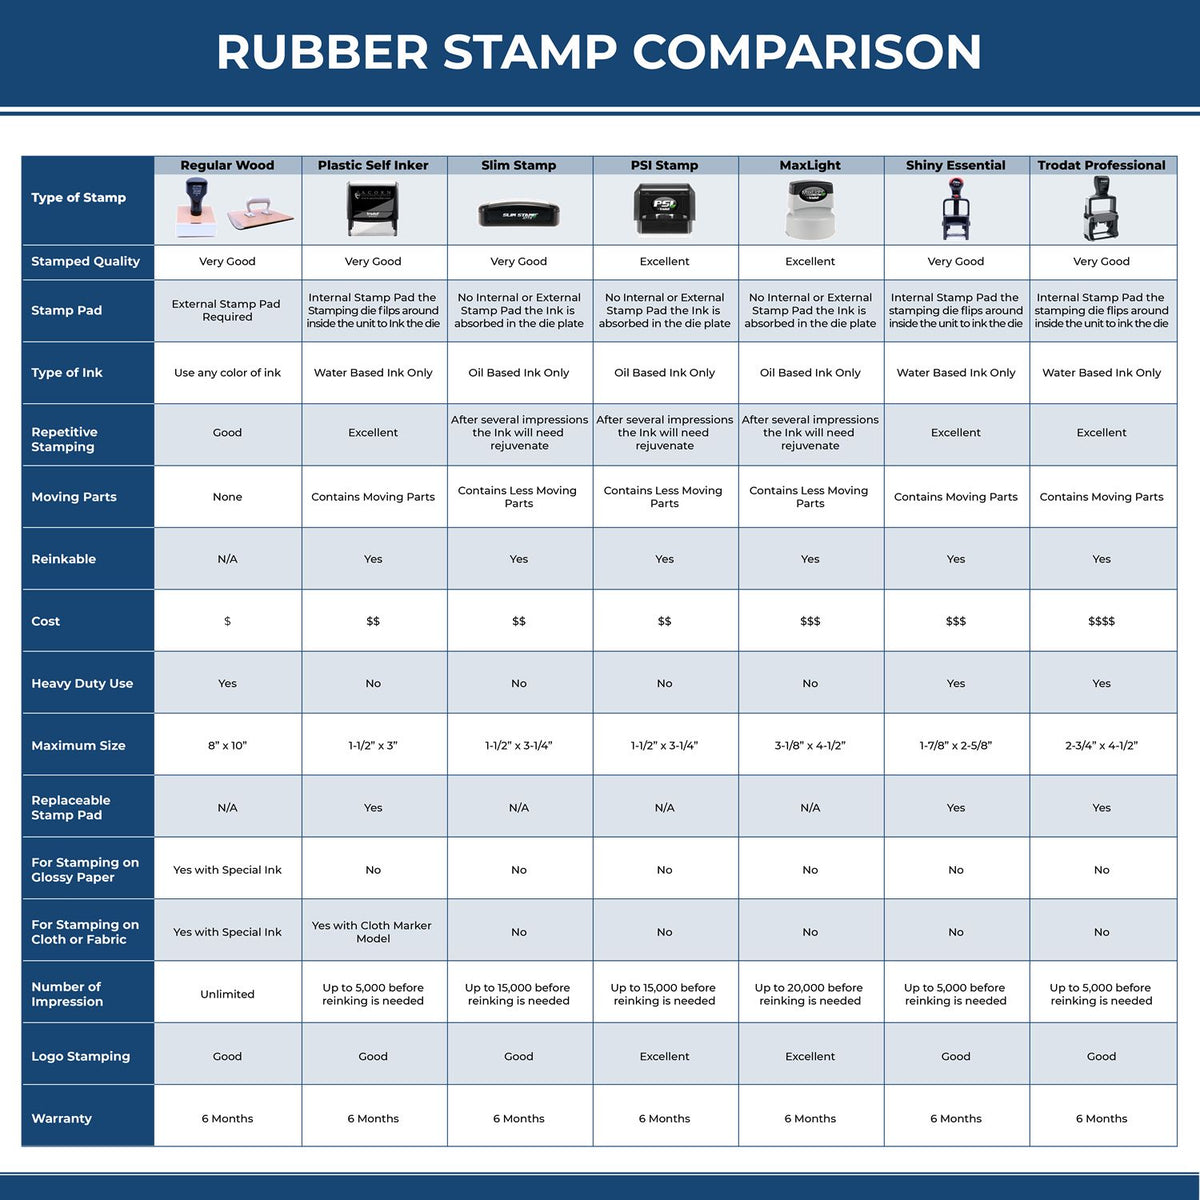 A comparison chart for the different types of mount models available for the Self-Inking Virginia PE Stamp.